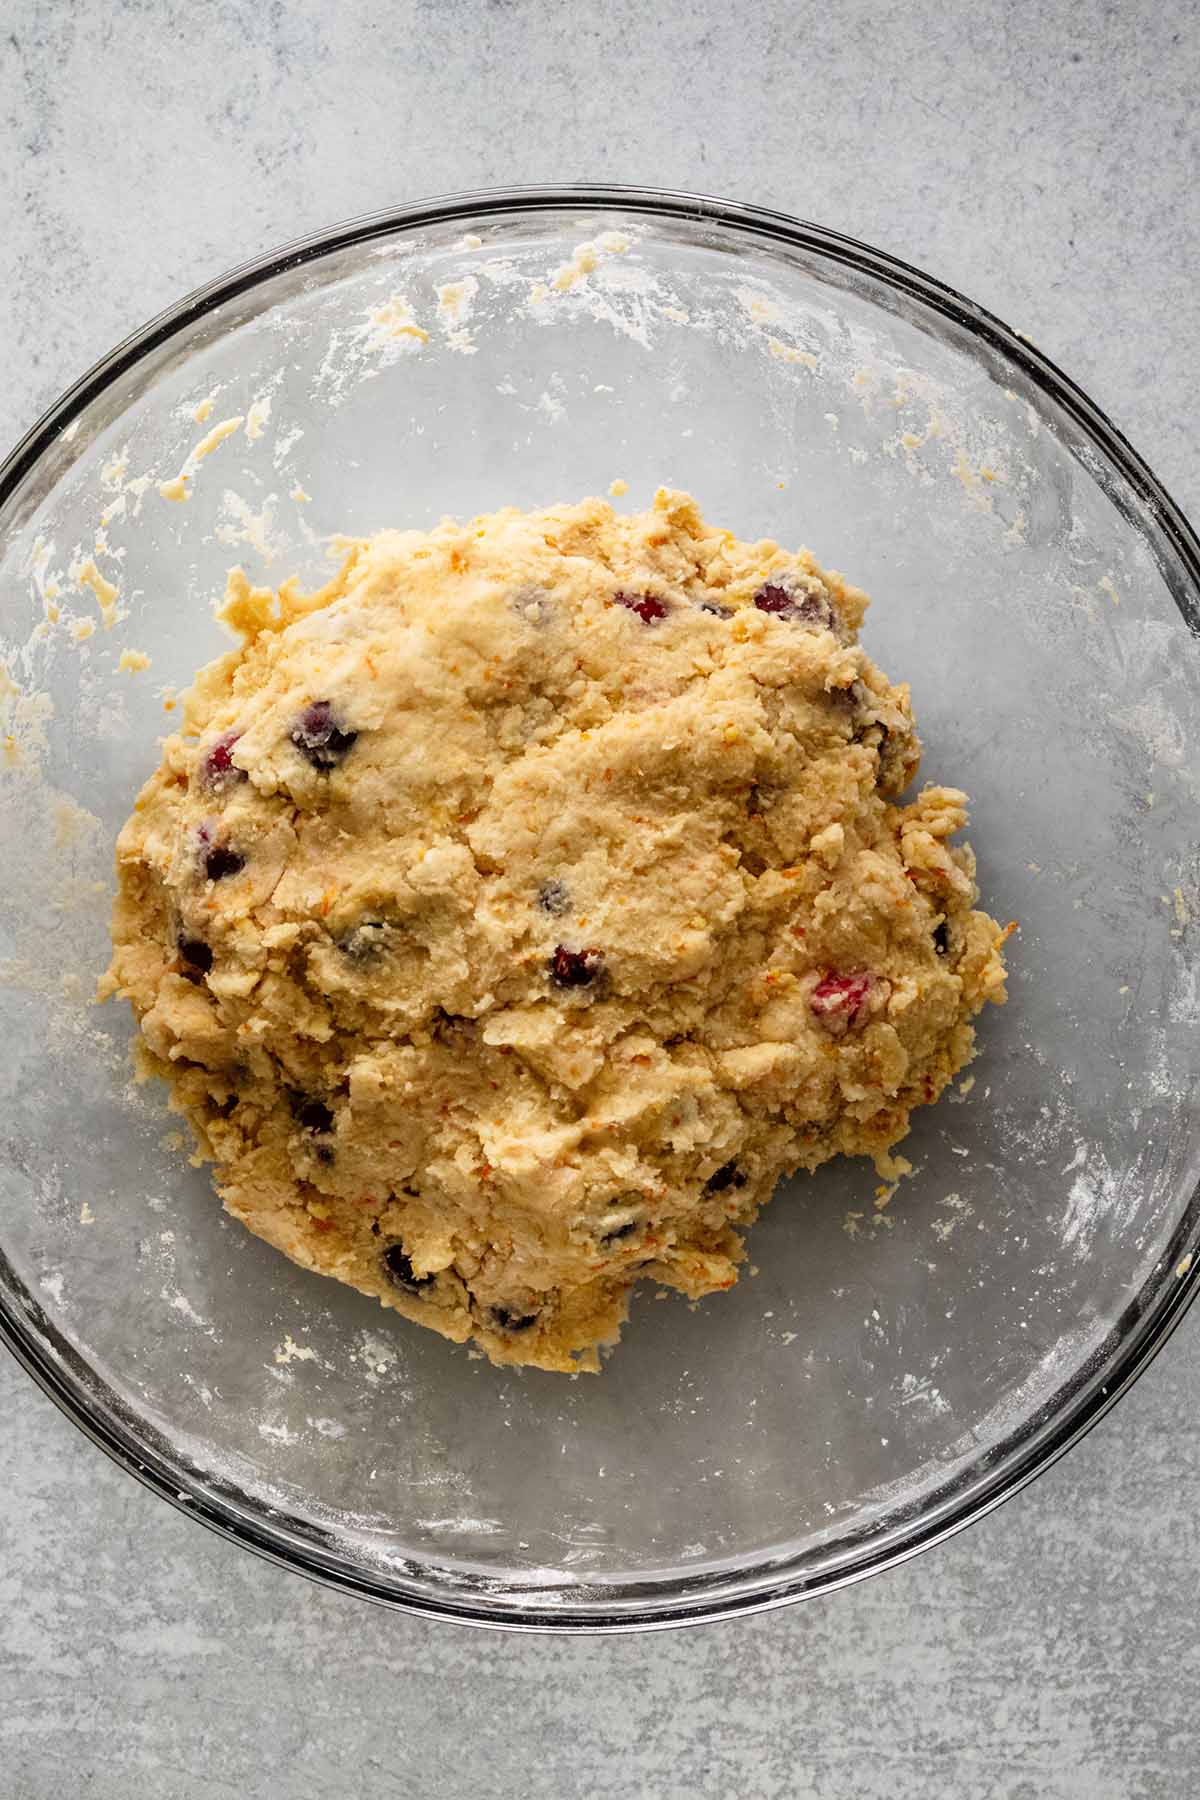 Scone dough in a large glass bowl